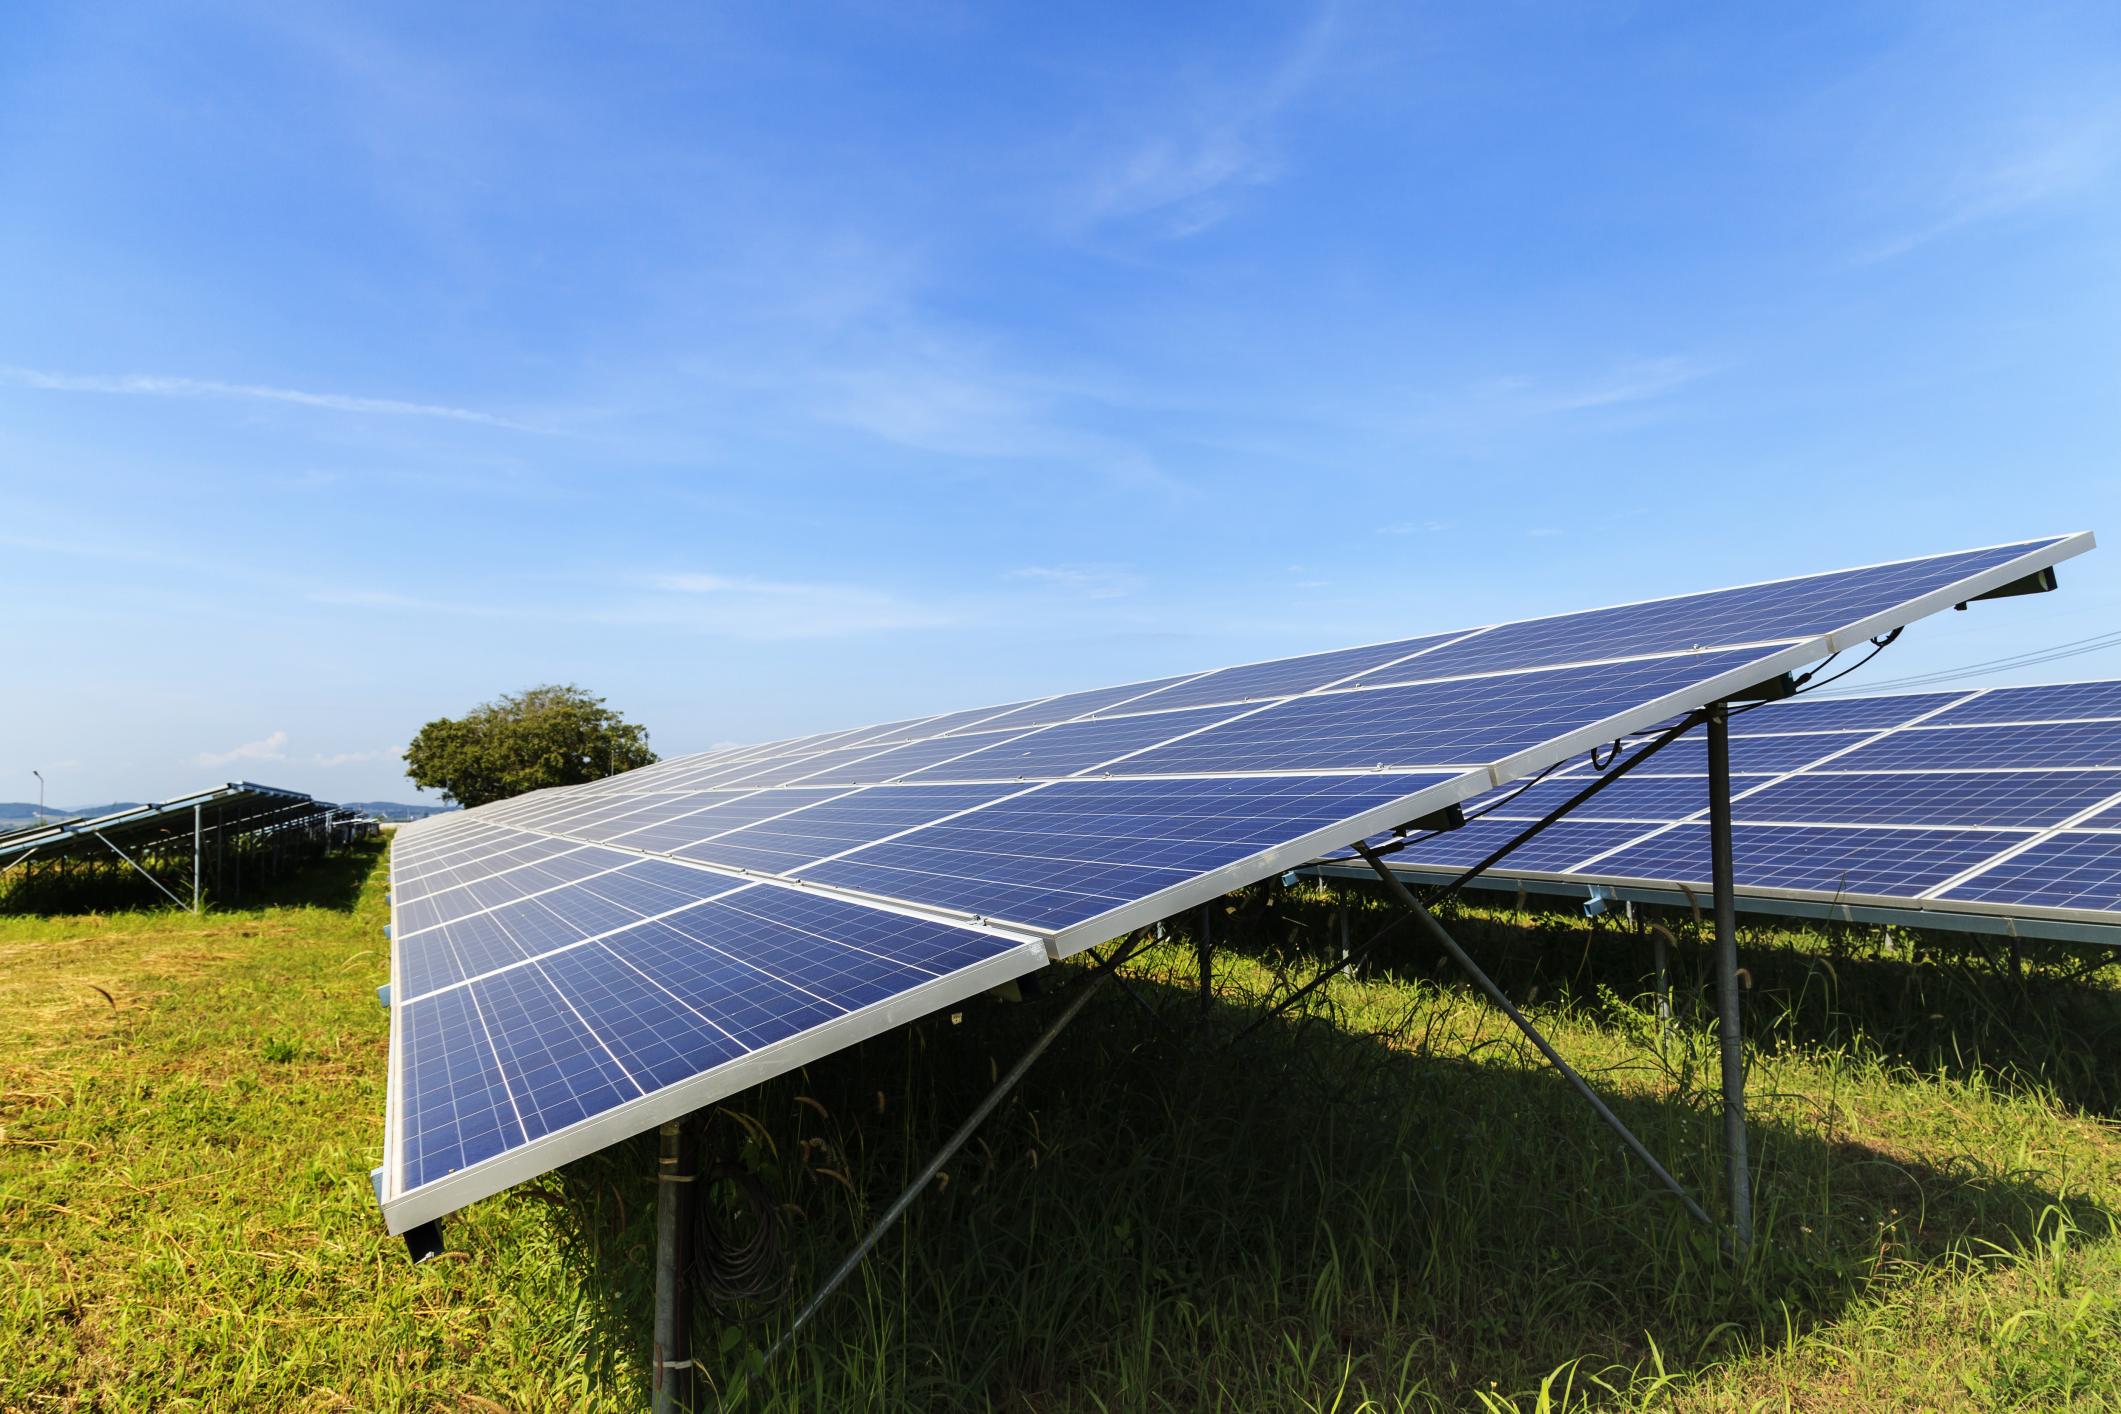 The town of Osakis, MN subscribes to Community Solar Garden